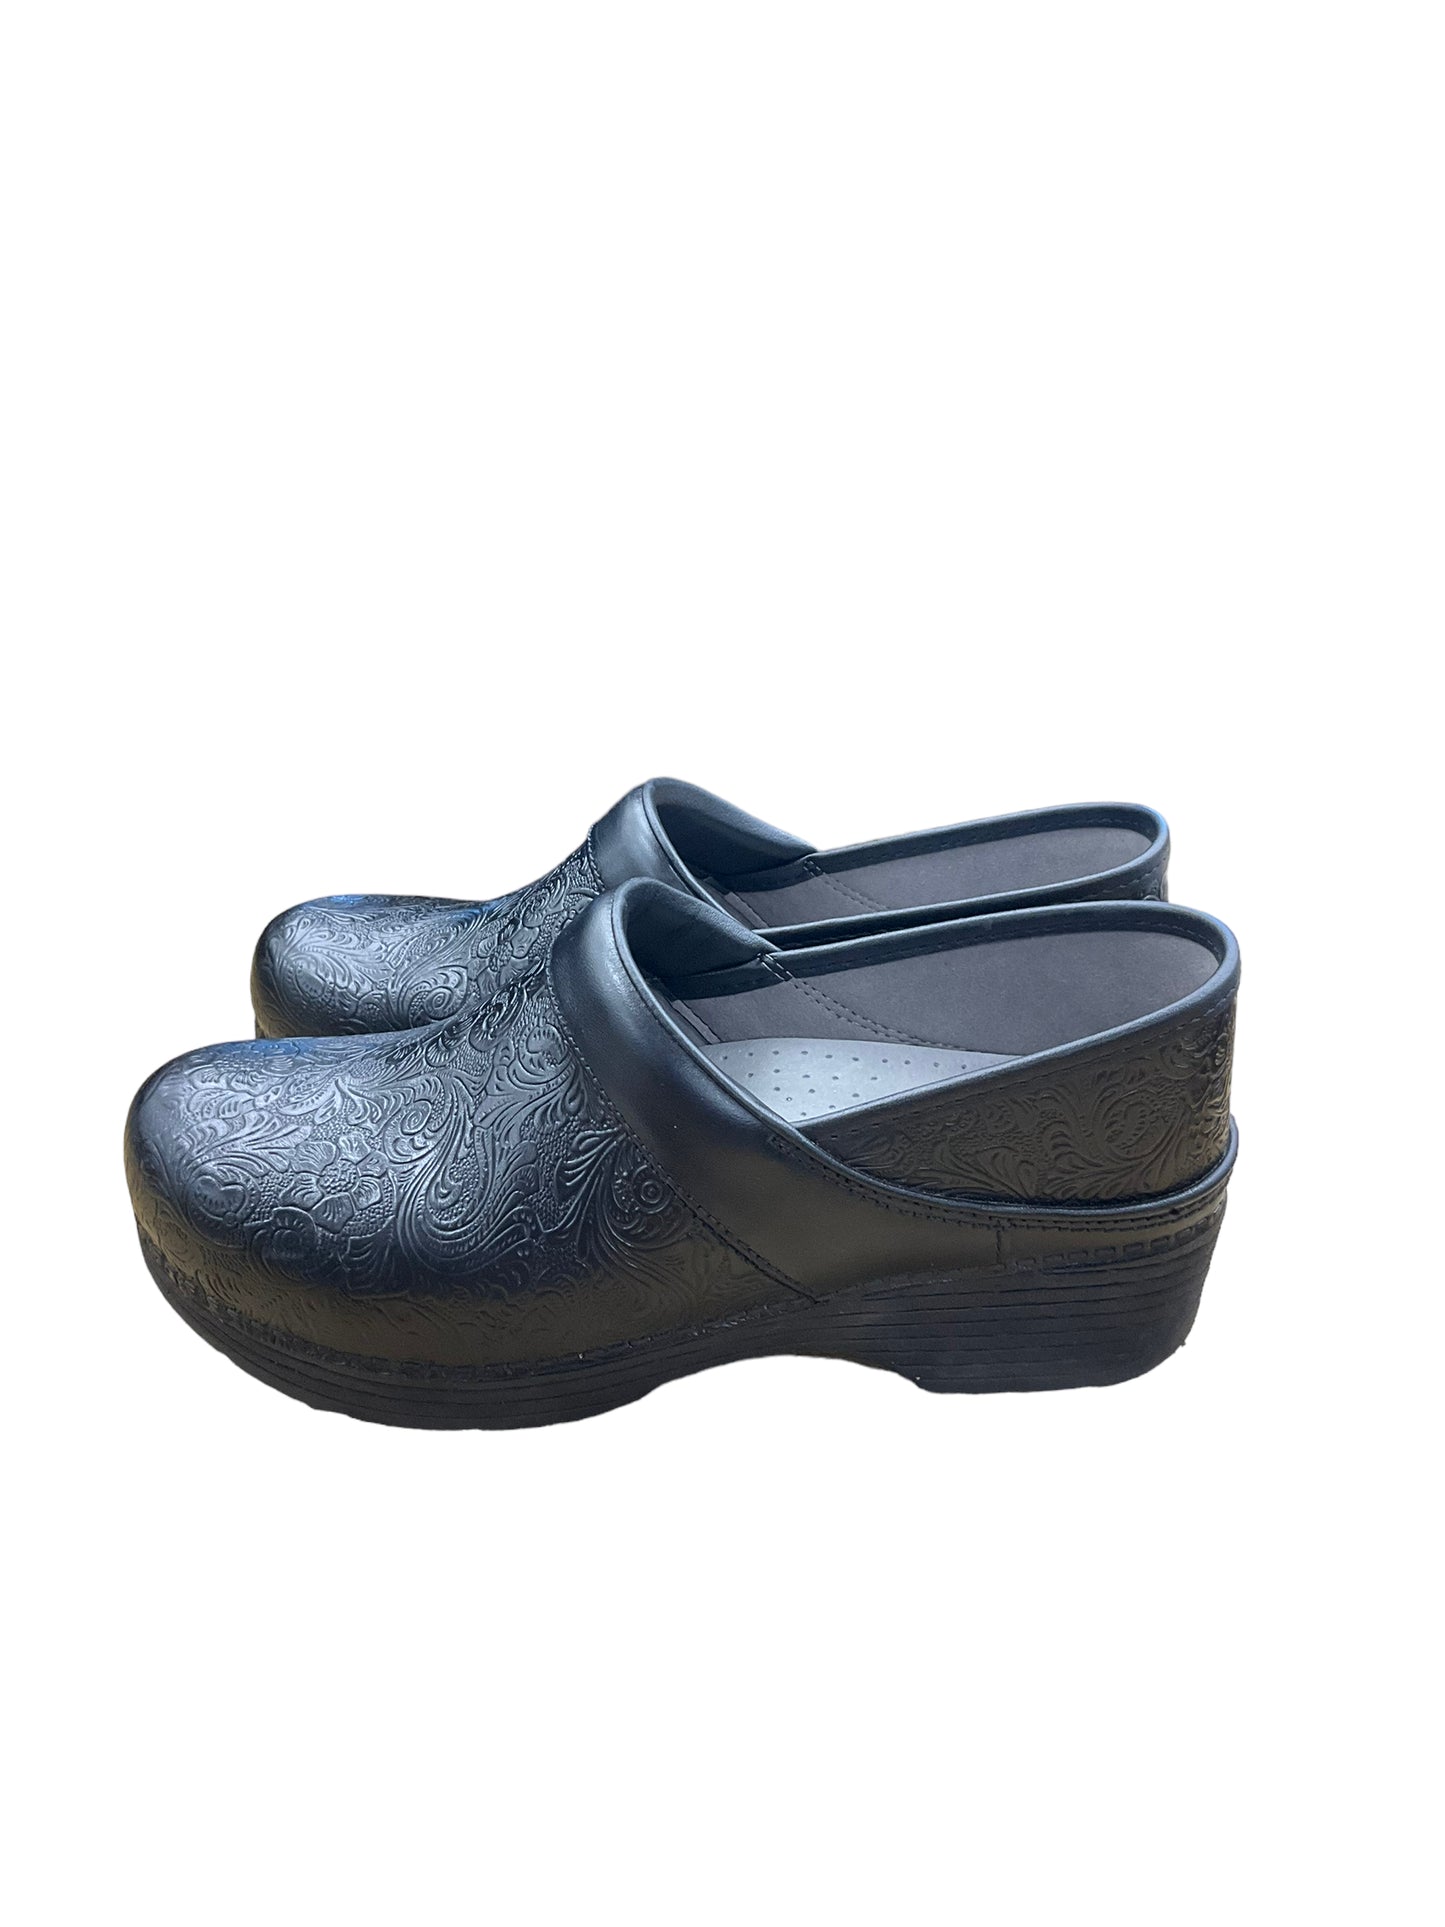 Shoes Flats Other By Dansko  Size: 9